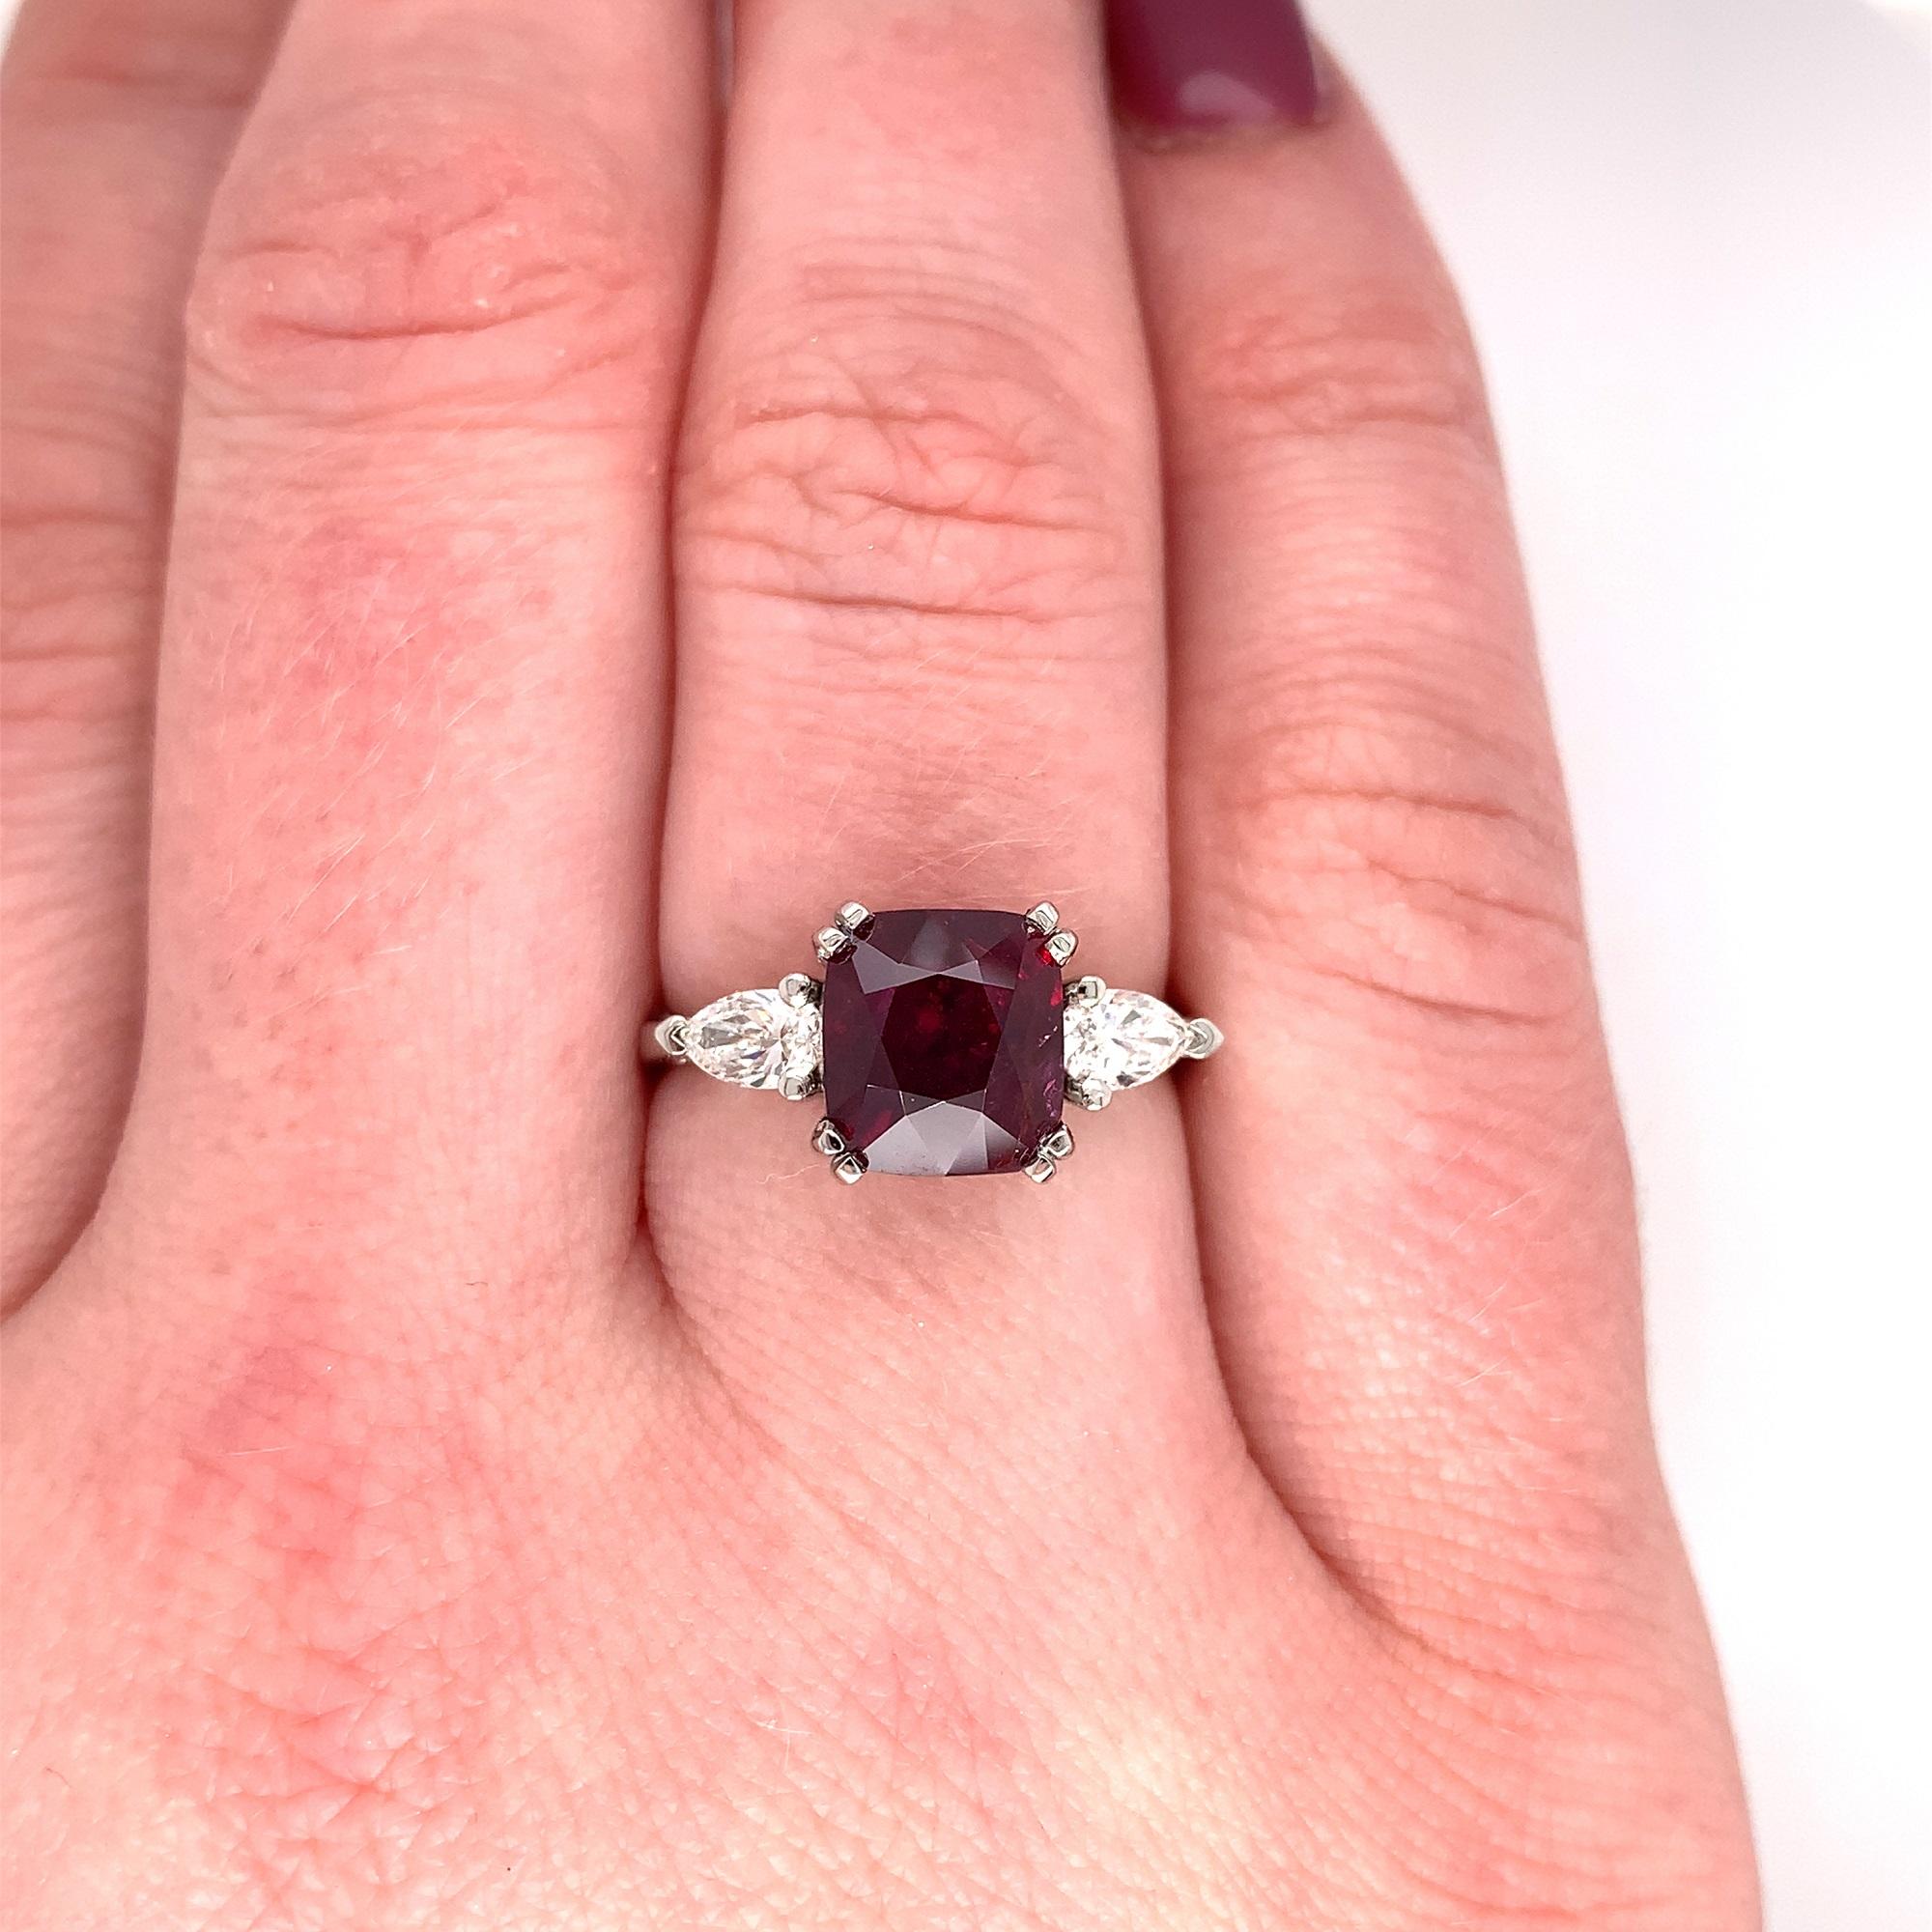 Platinum 3.27 carat Cushion Cut Ruby Ring In New Condition For Sale In Big Bend, WI